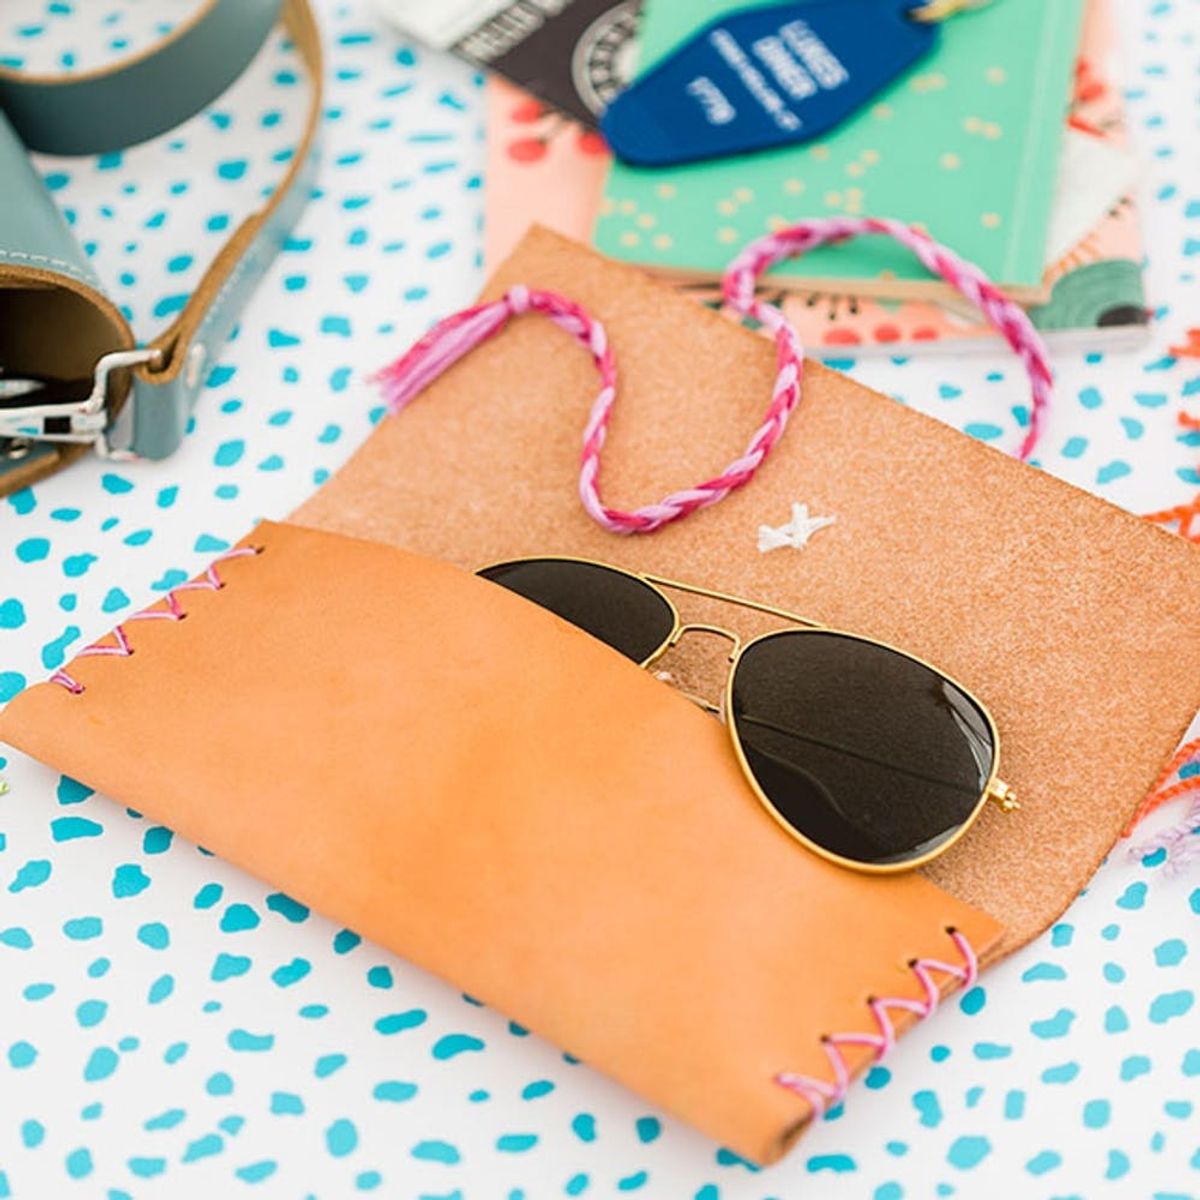 Win Best Child Award With This DIY Sunglass Case for Mom